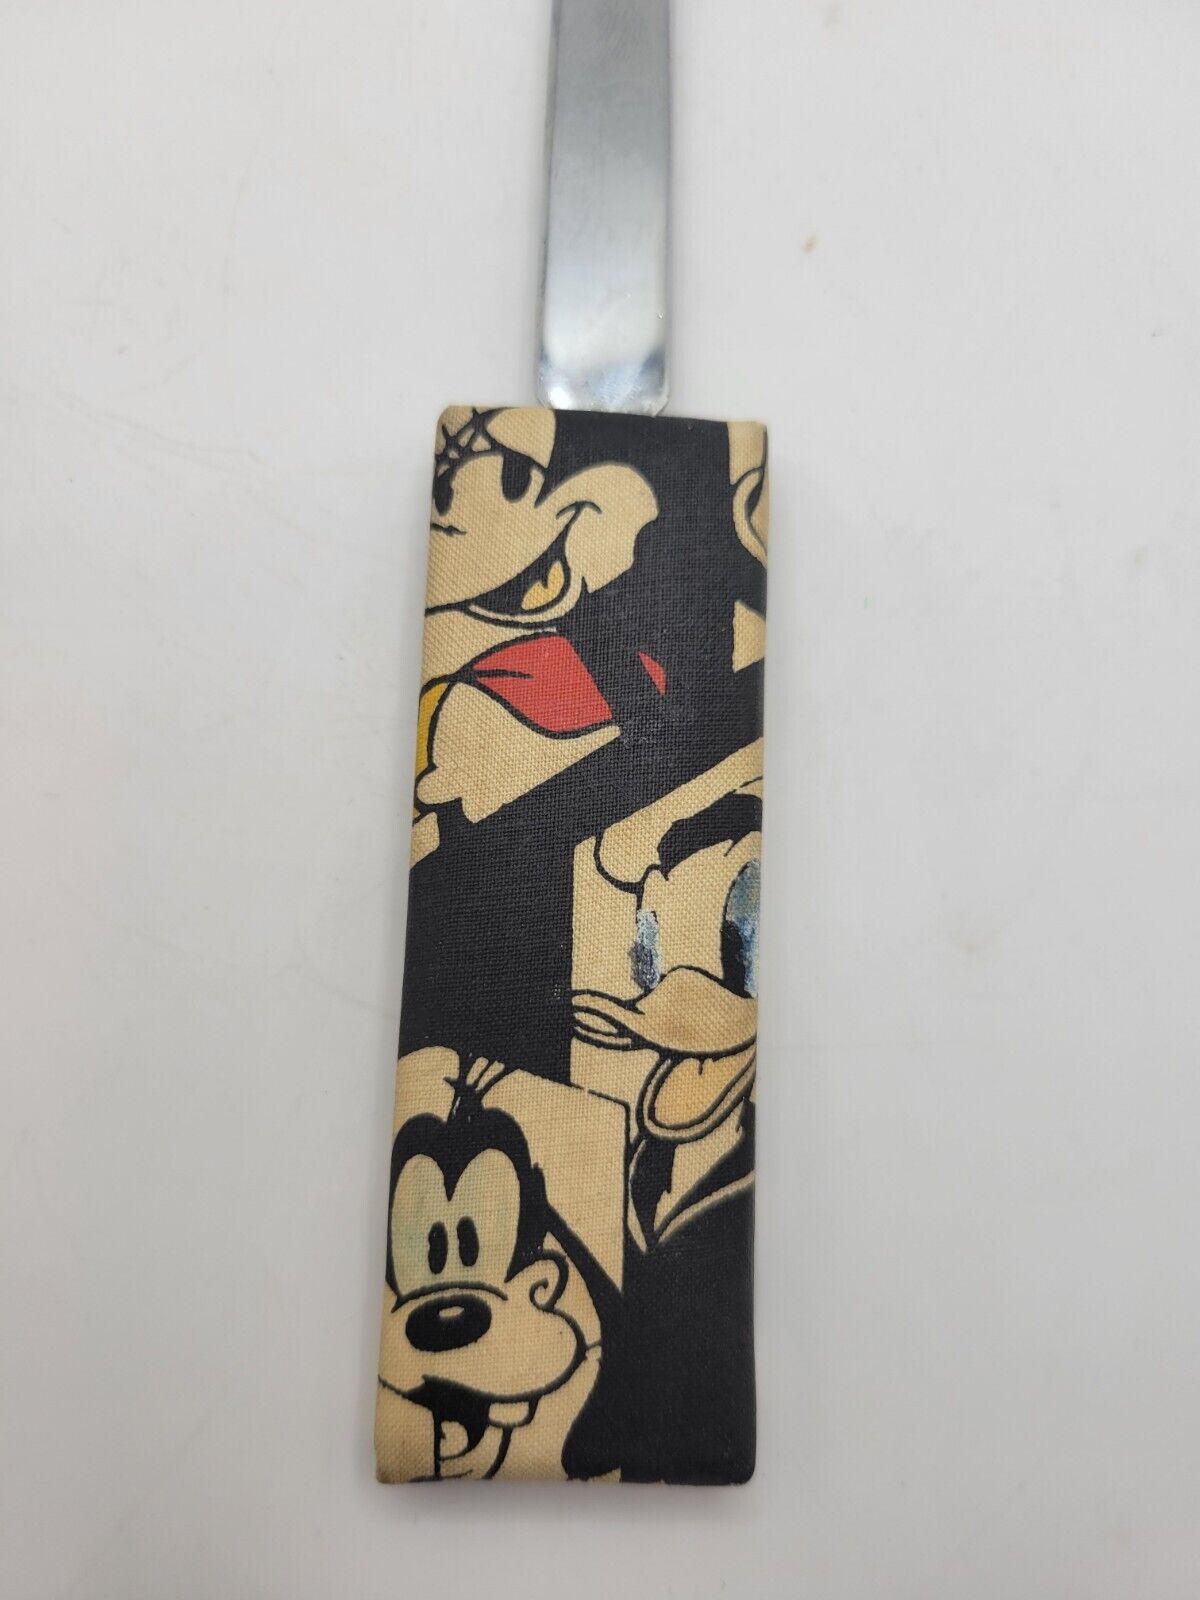 Vintage Disney Letter Opener Mickey Mouse Goofy Daffy Ducky